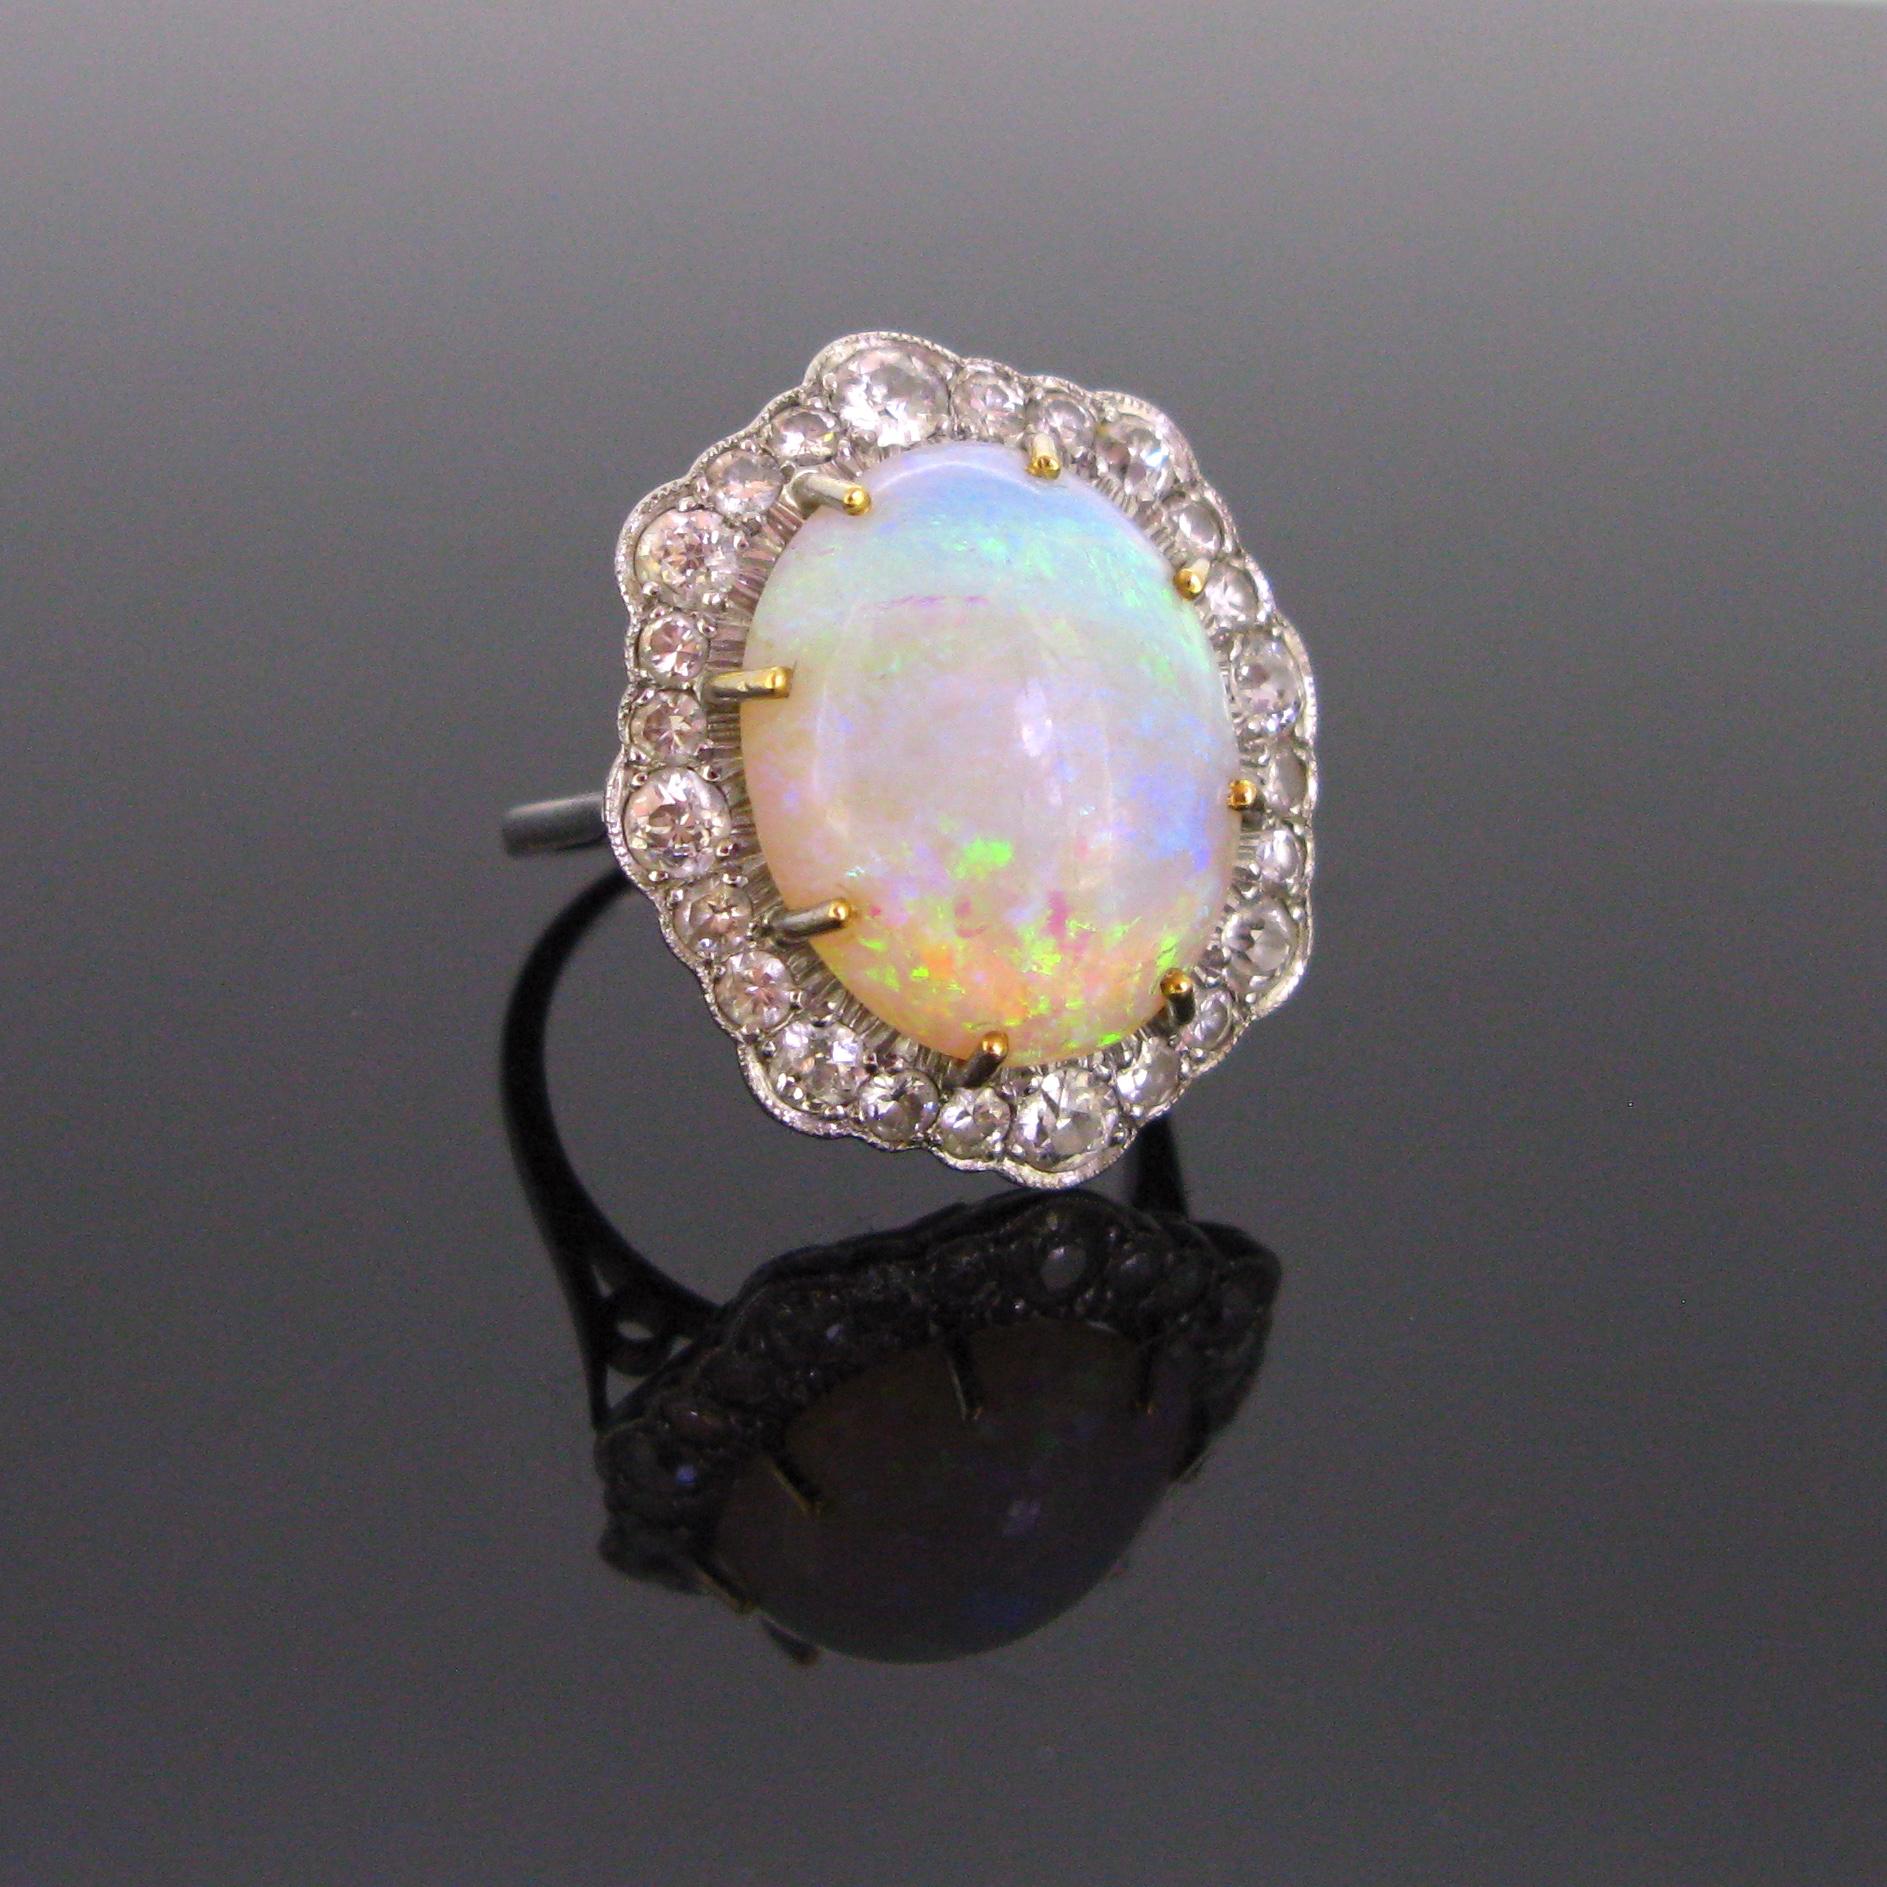 This beautiful ring features an opal weighing over 10ct and is surrounded by 26 old European cut diamonds of varying sizes weighing approximately in total 1.90ct. The fires in this opal are lively and vibrant. Opal is the birthstone for the month of